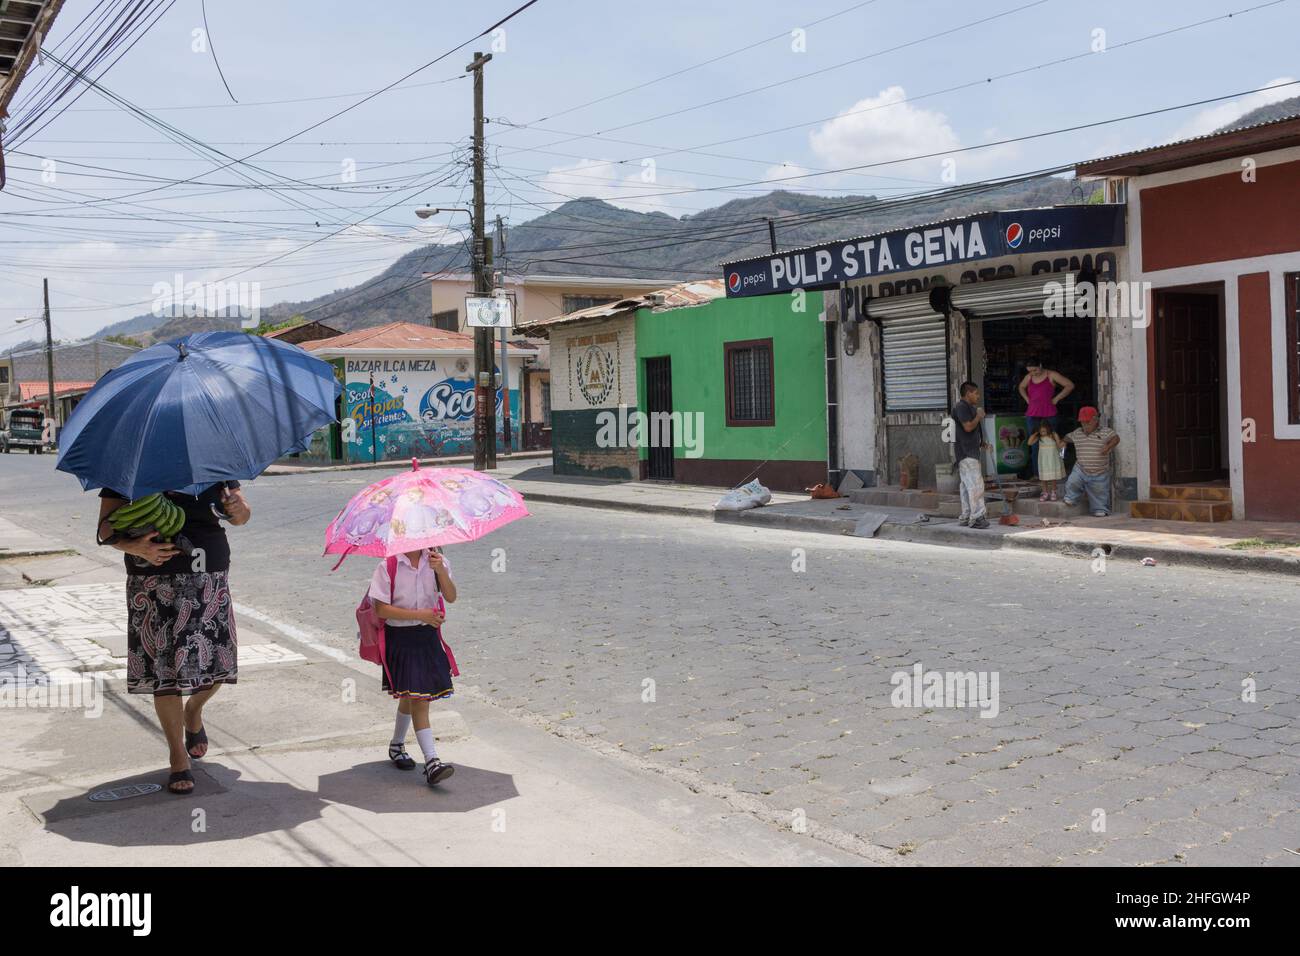 A woman and a girl walk with parasols to shade them from bright tropical sun in Jinotega, Nicaragua. Stock Photo